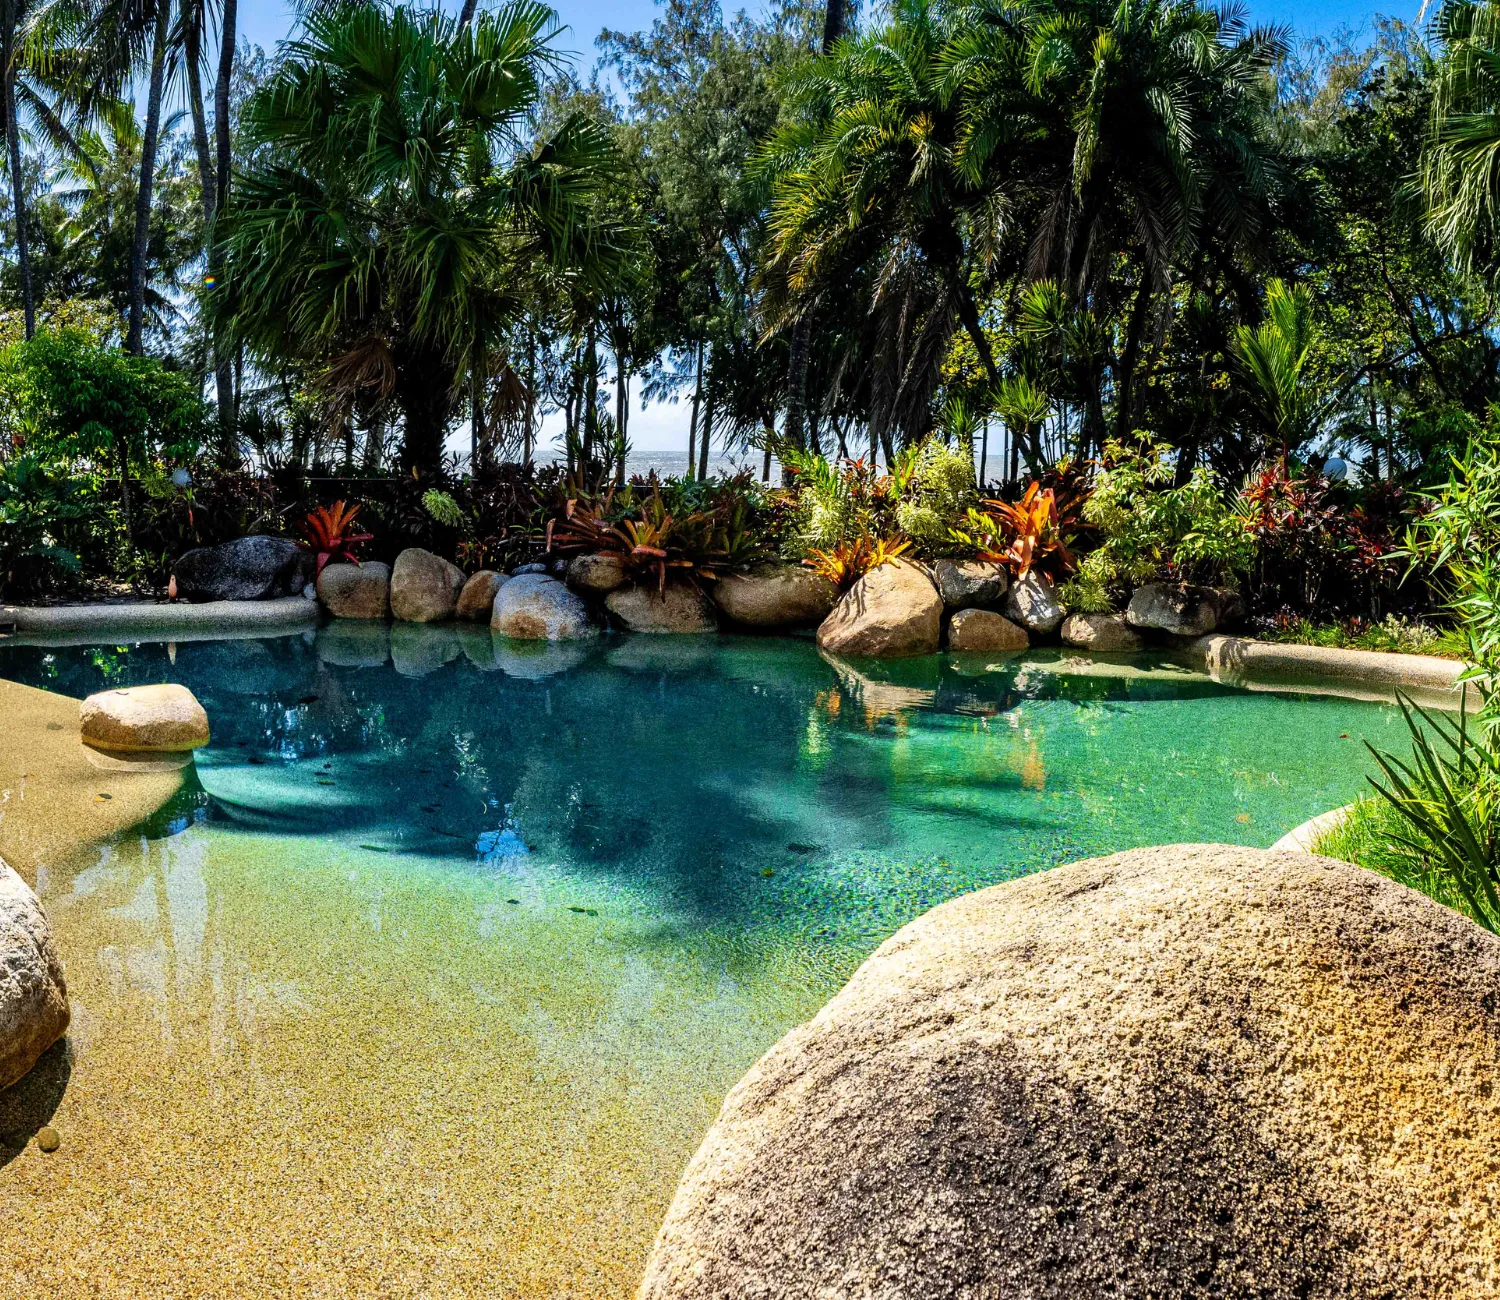 Melaleuca Resort Pool showing the rocks and gardens and behind the beautiful palm trees, you can see the beach.